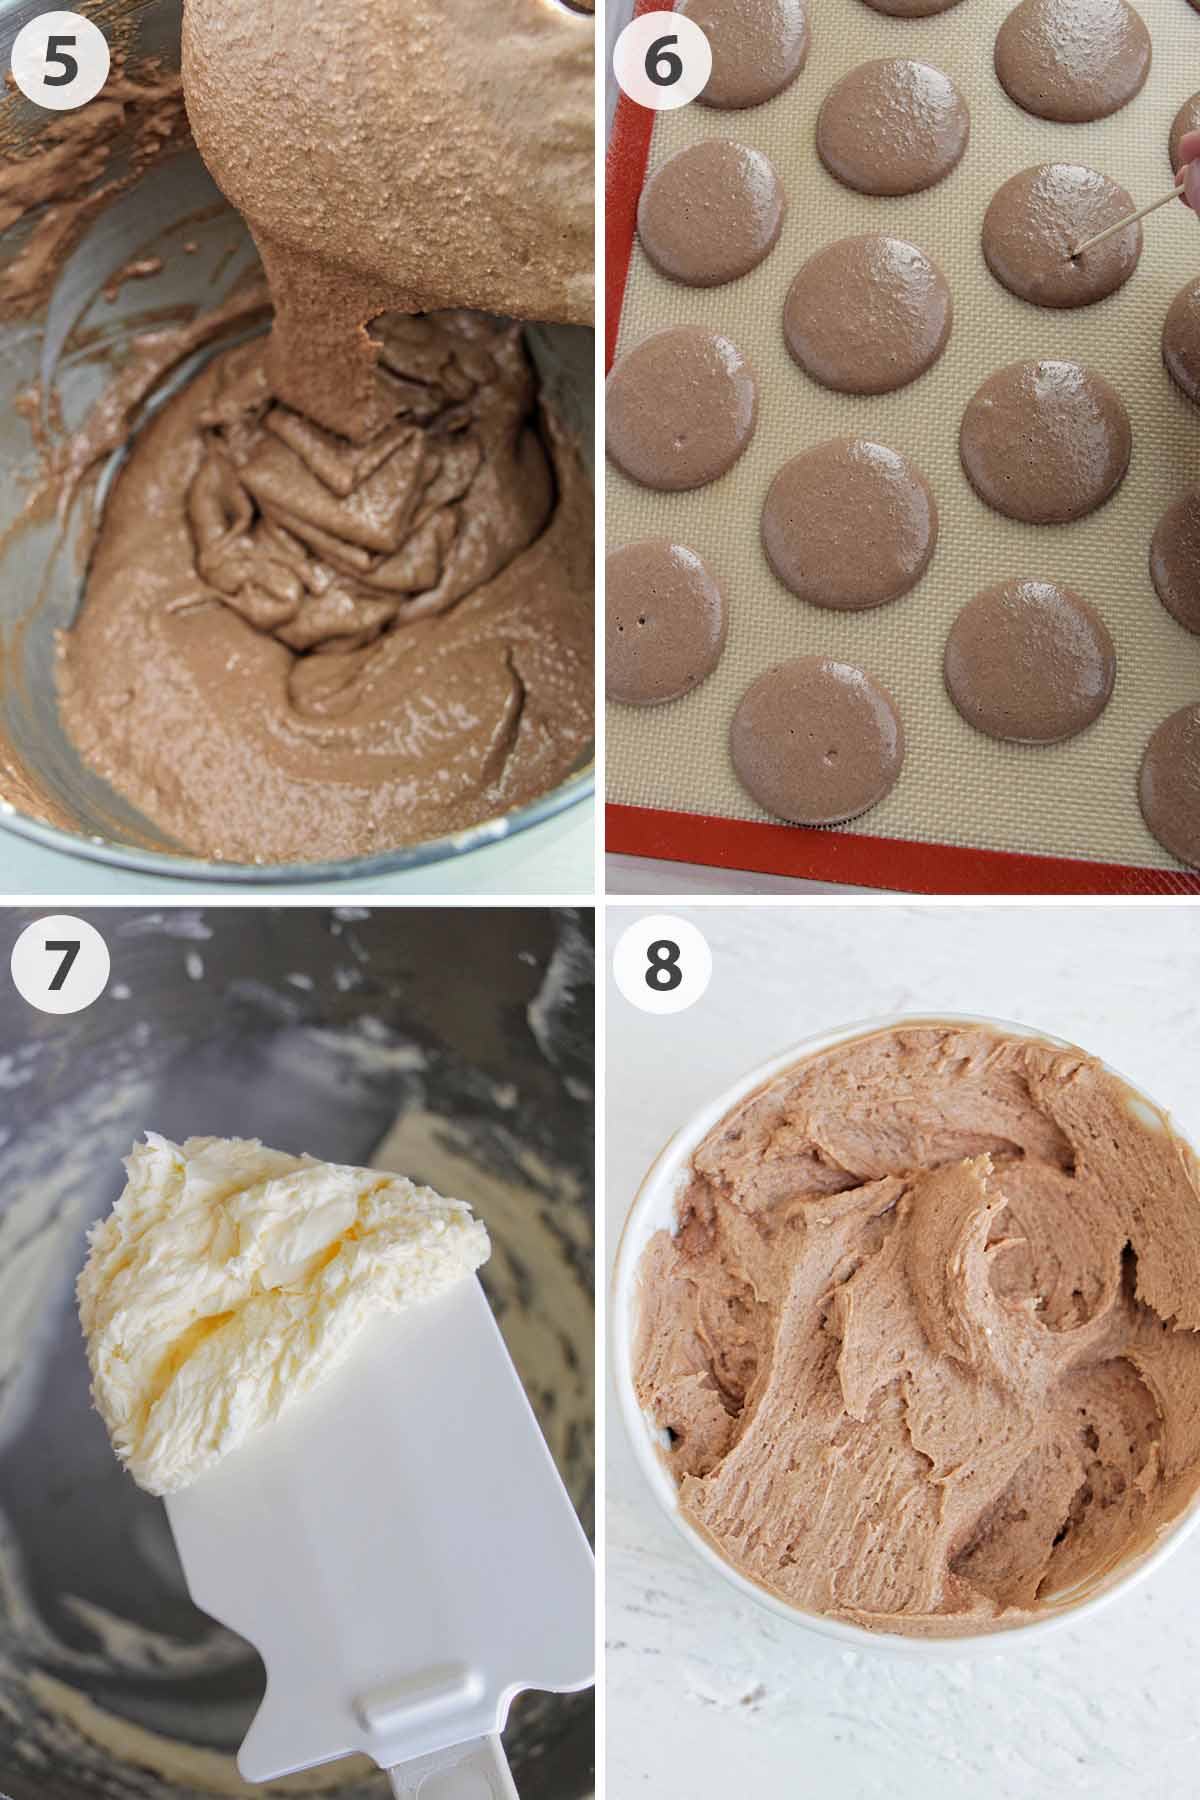 four numbered photos showing how to make Guinness macaron shells and filling.